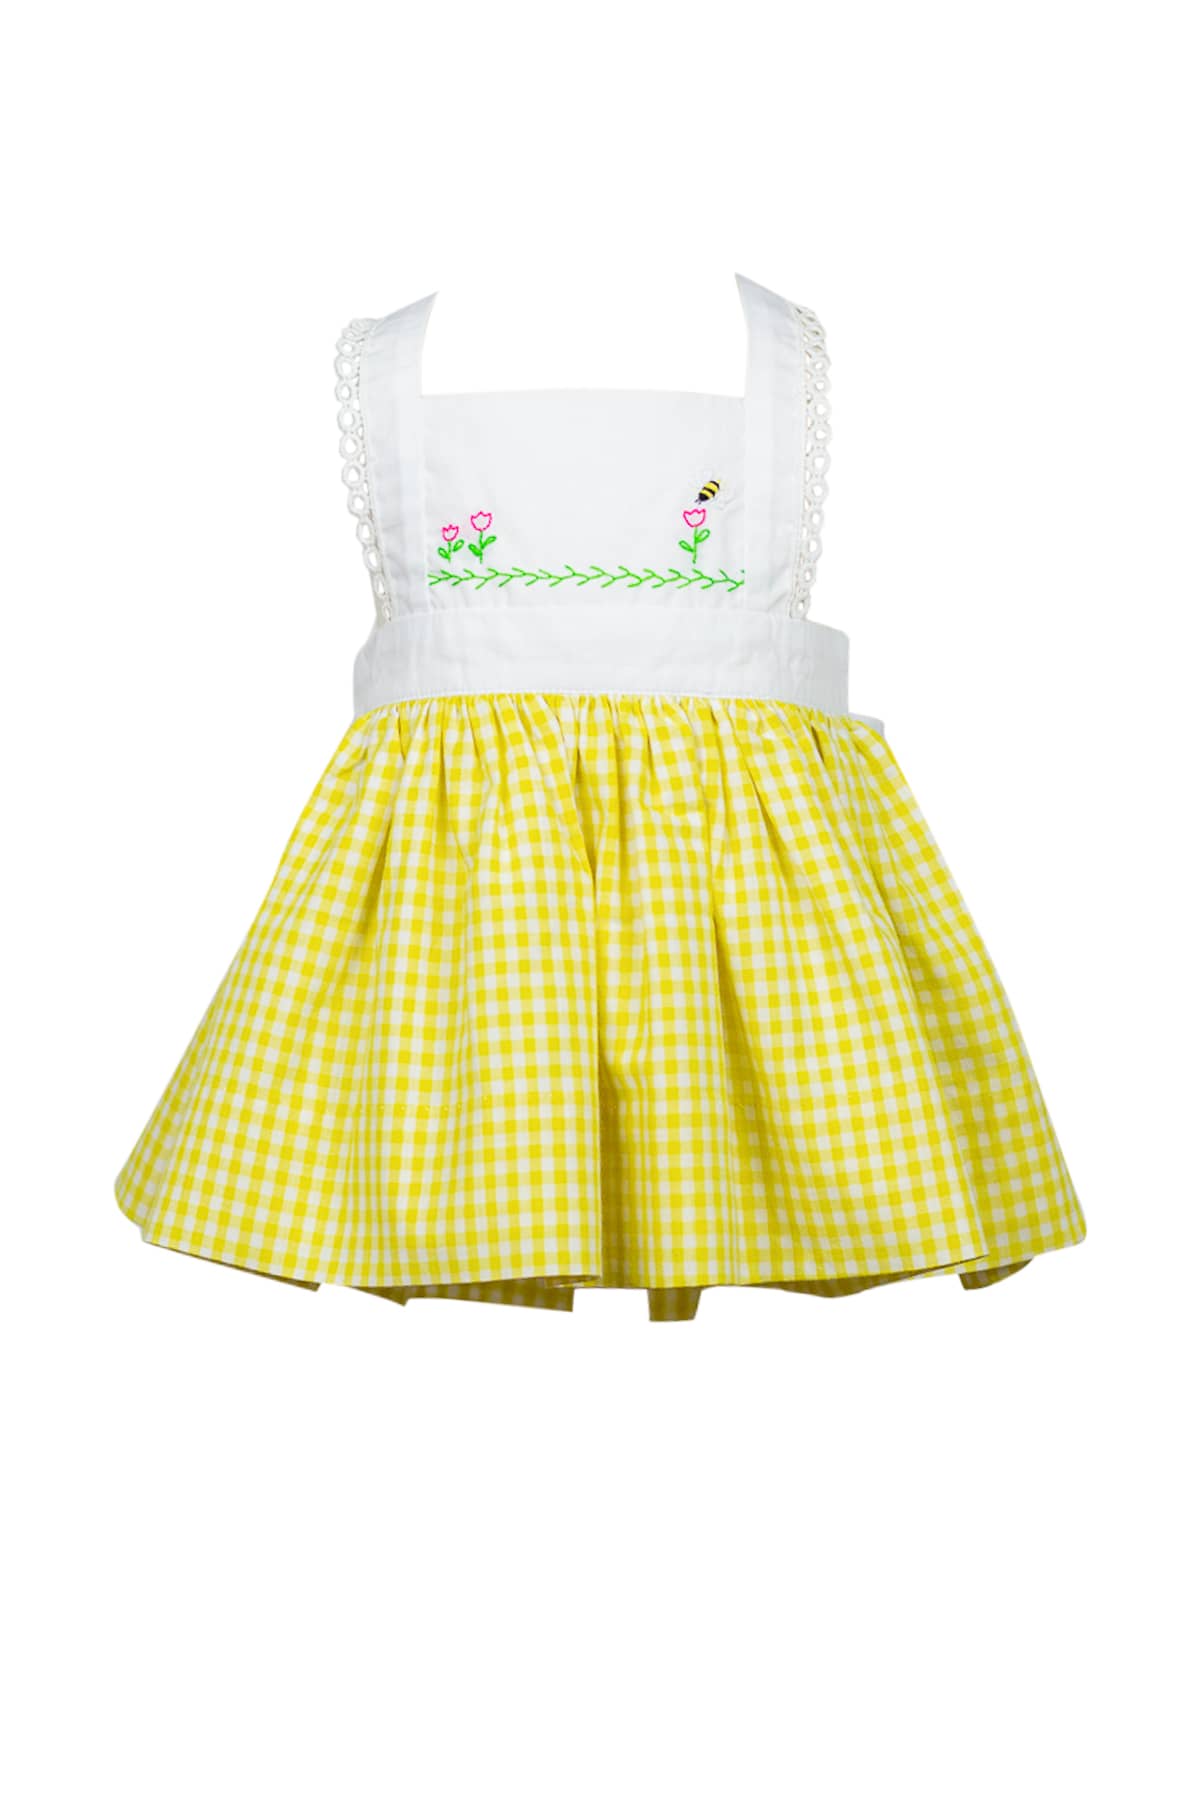 BUSY BEE PINAFORE DRESS